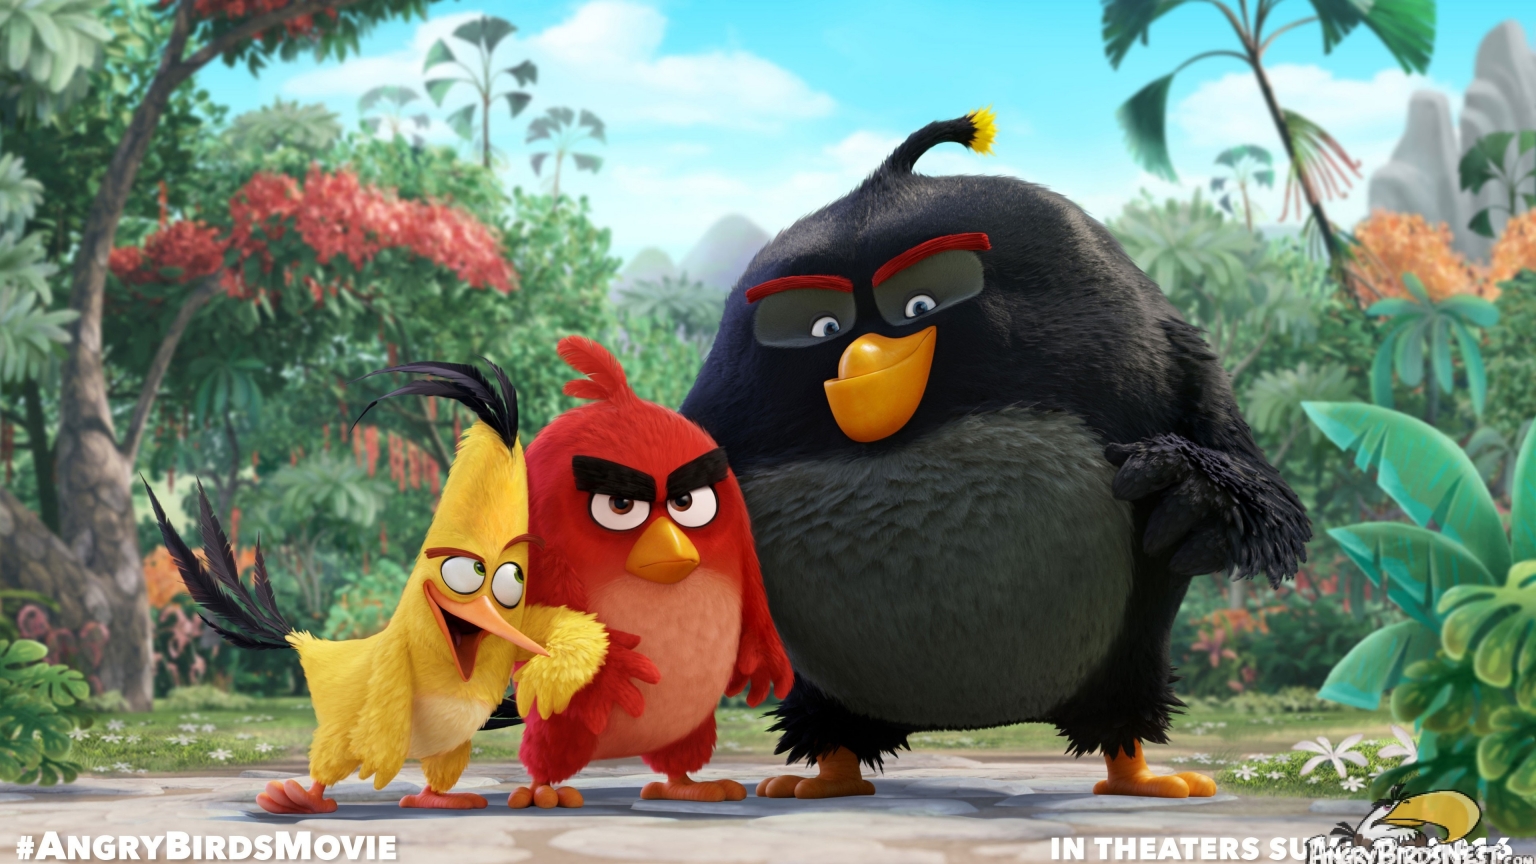 Angry Birds Movie for 1536 x 864 HDTV resolution